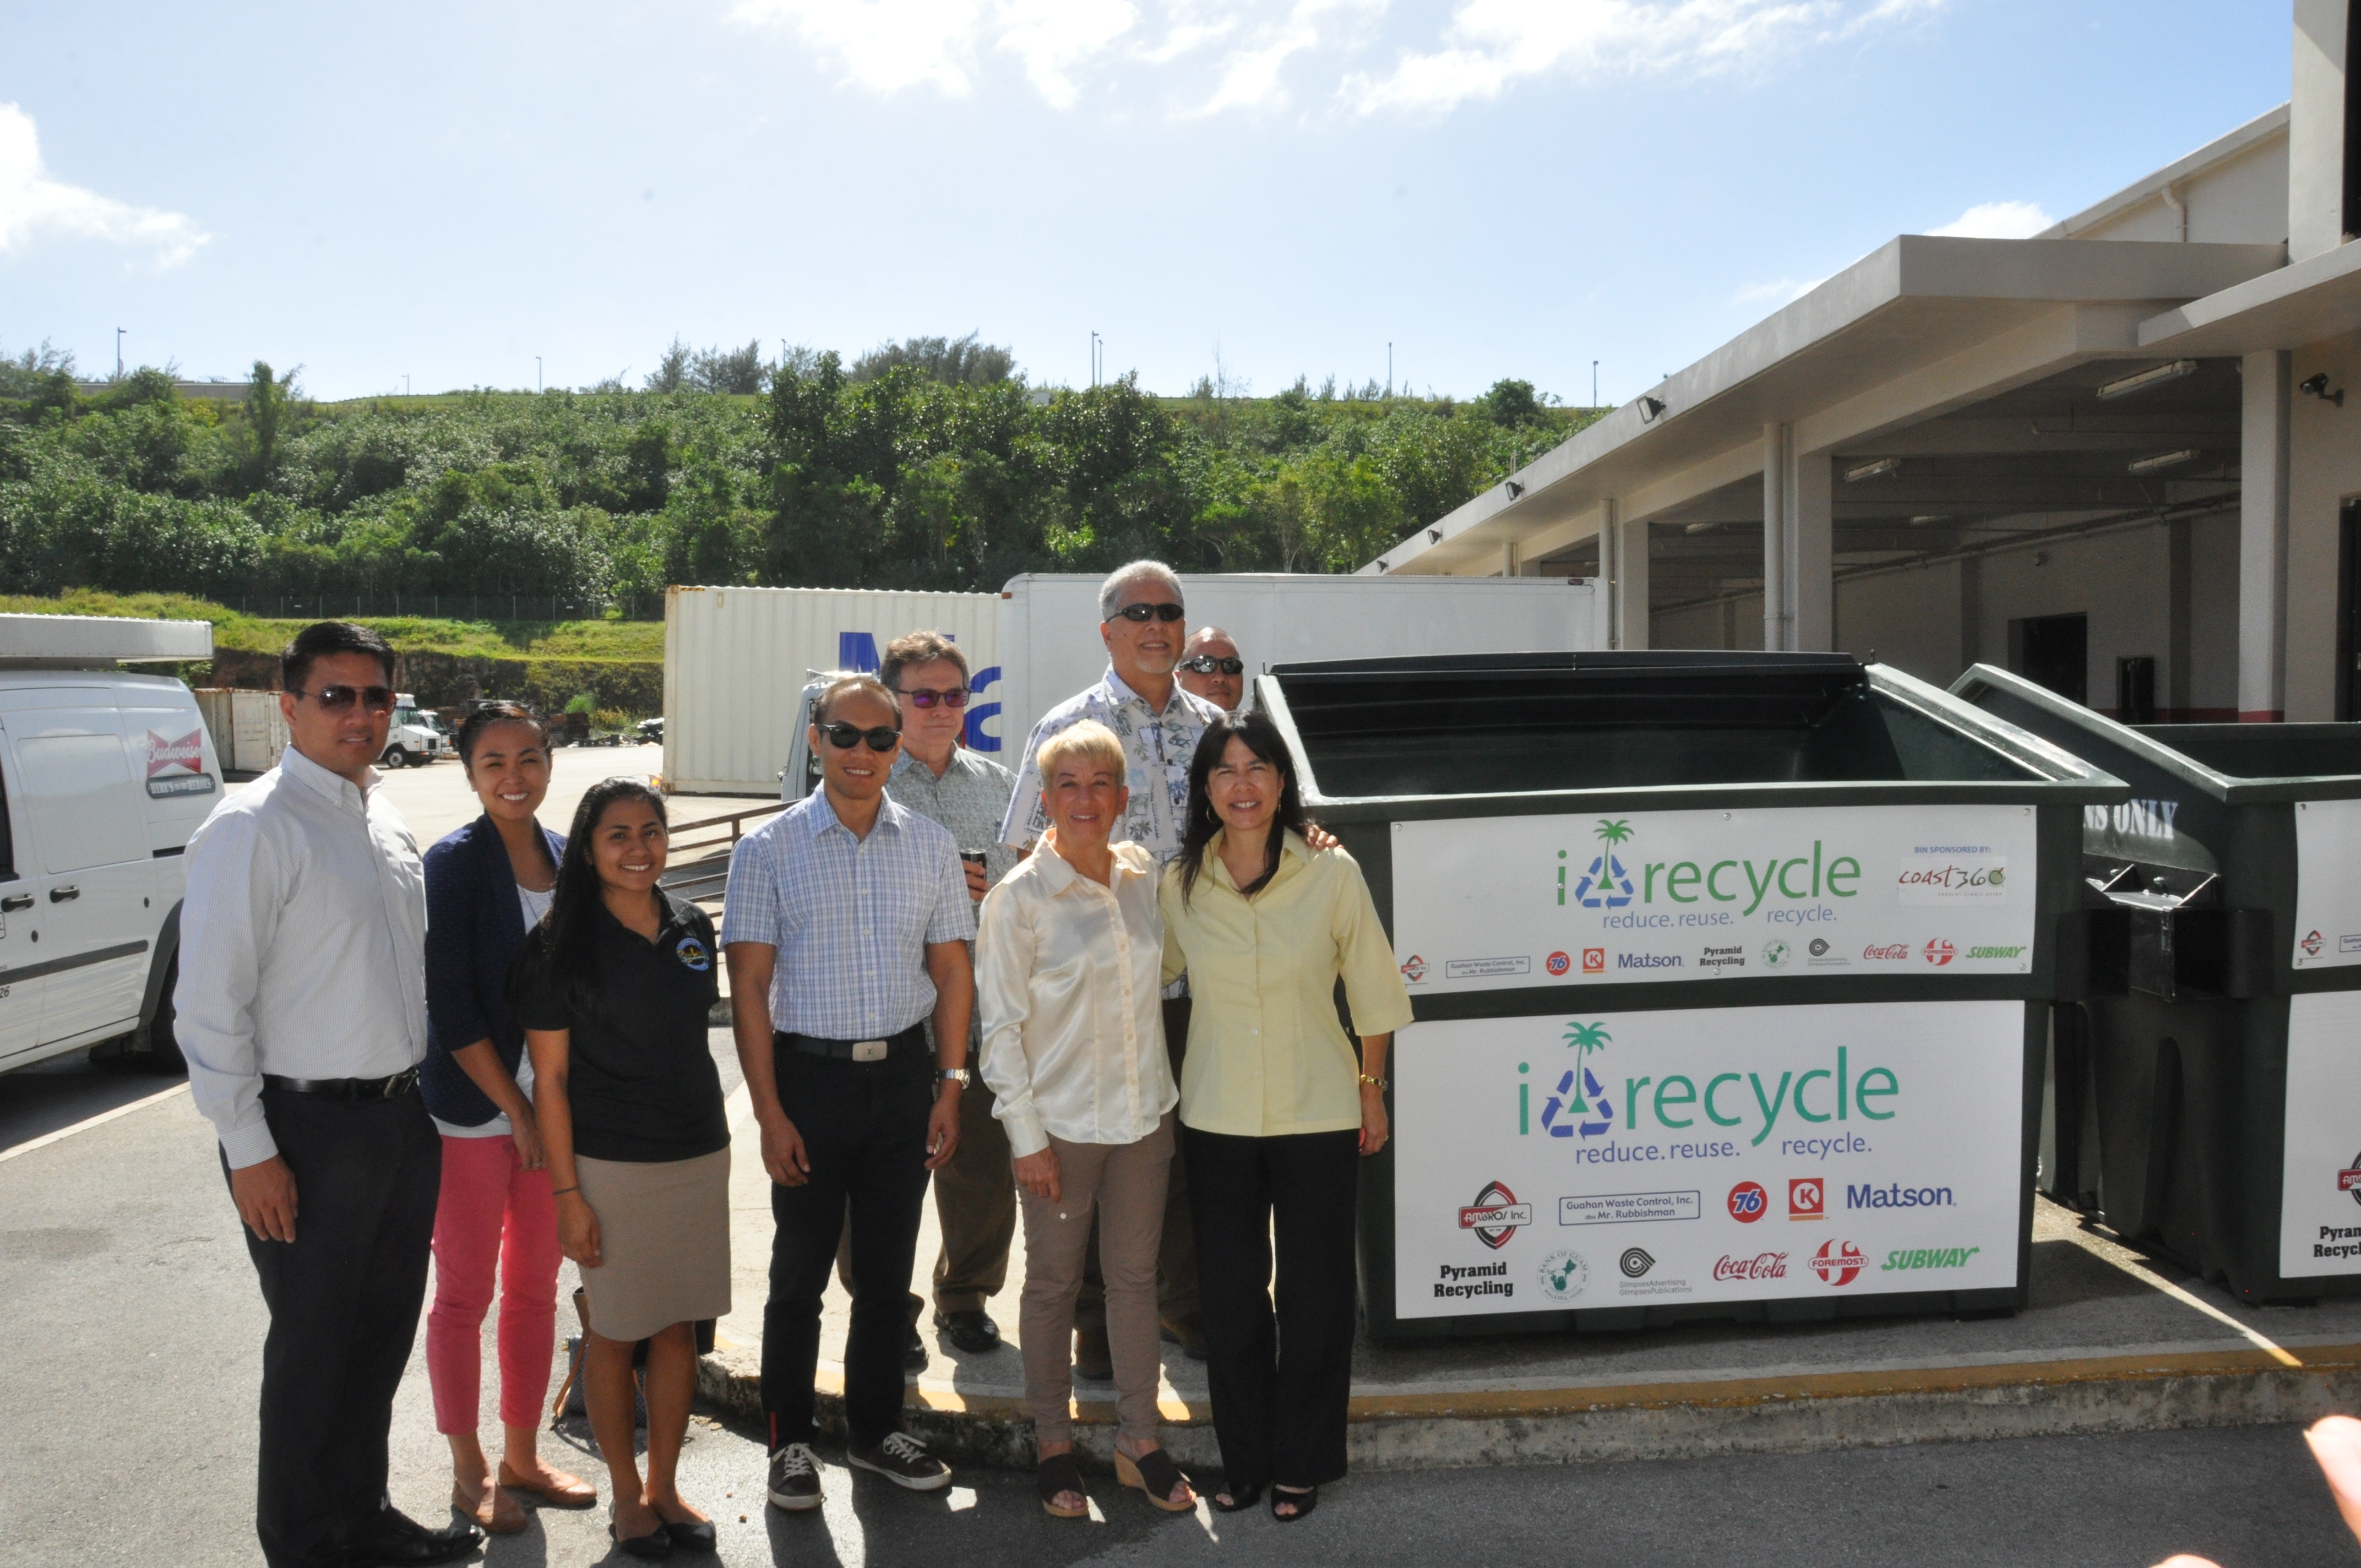 Coast 360 and the Pay-Less Foundation<br>fund new Plastic Recycling bins for the I*RECYLE Program